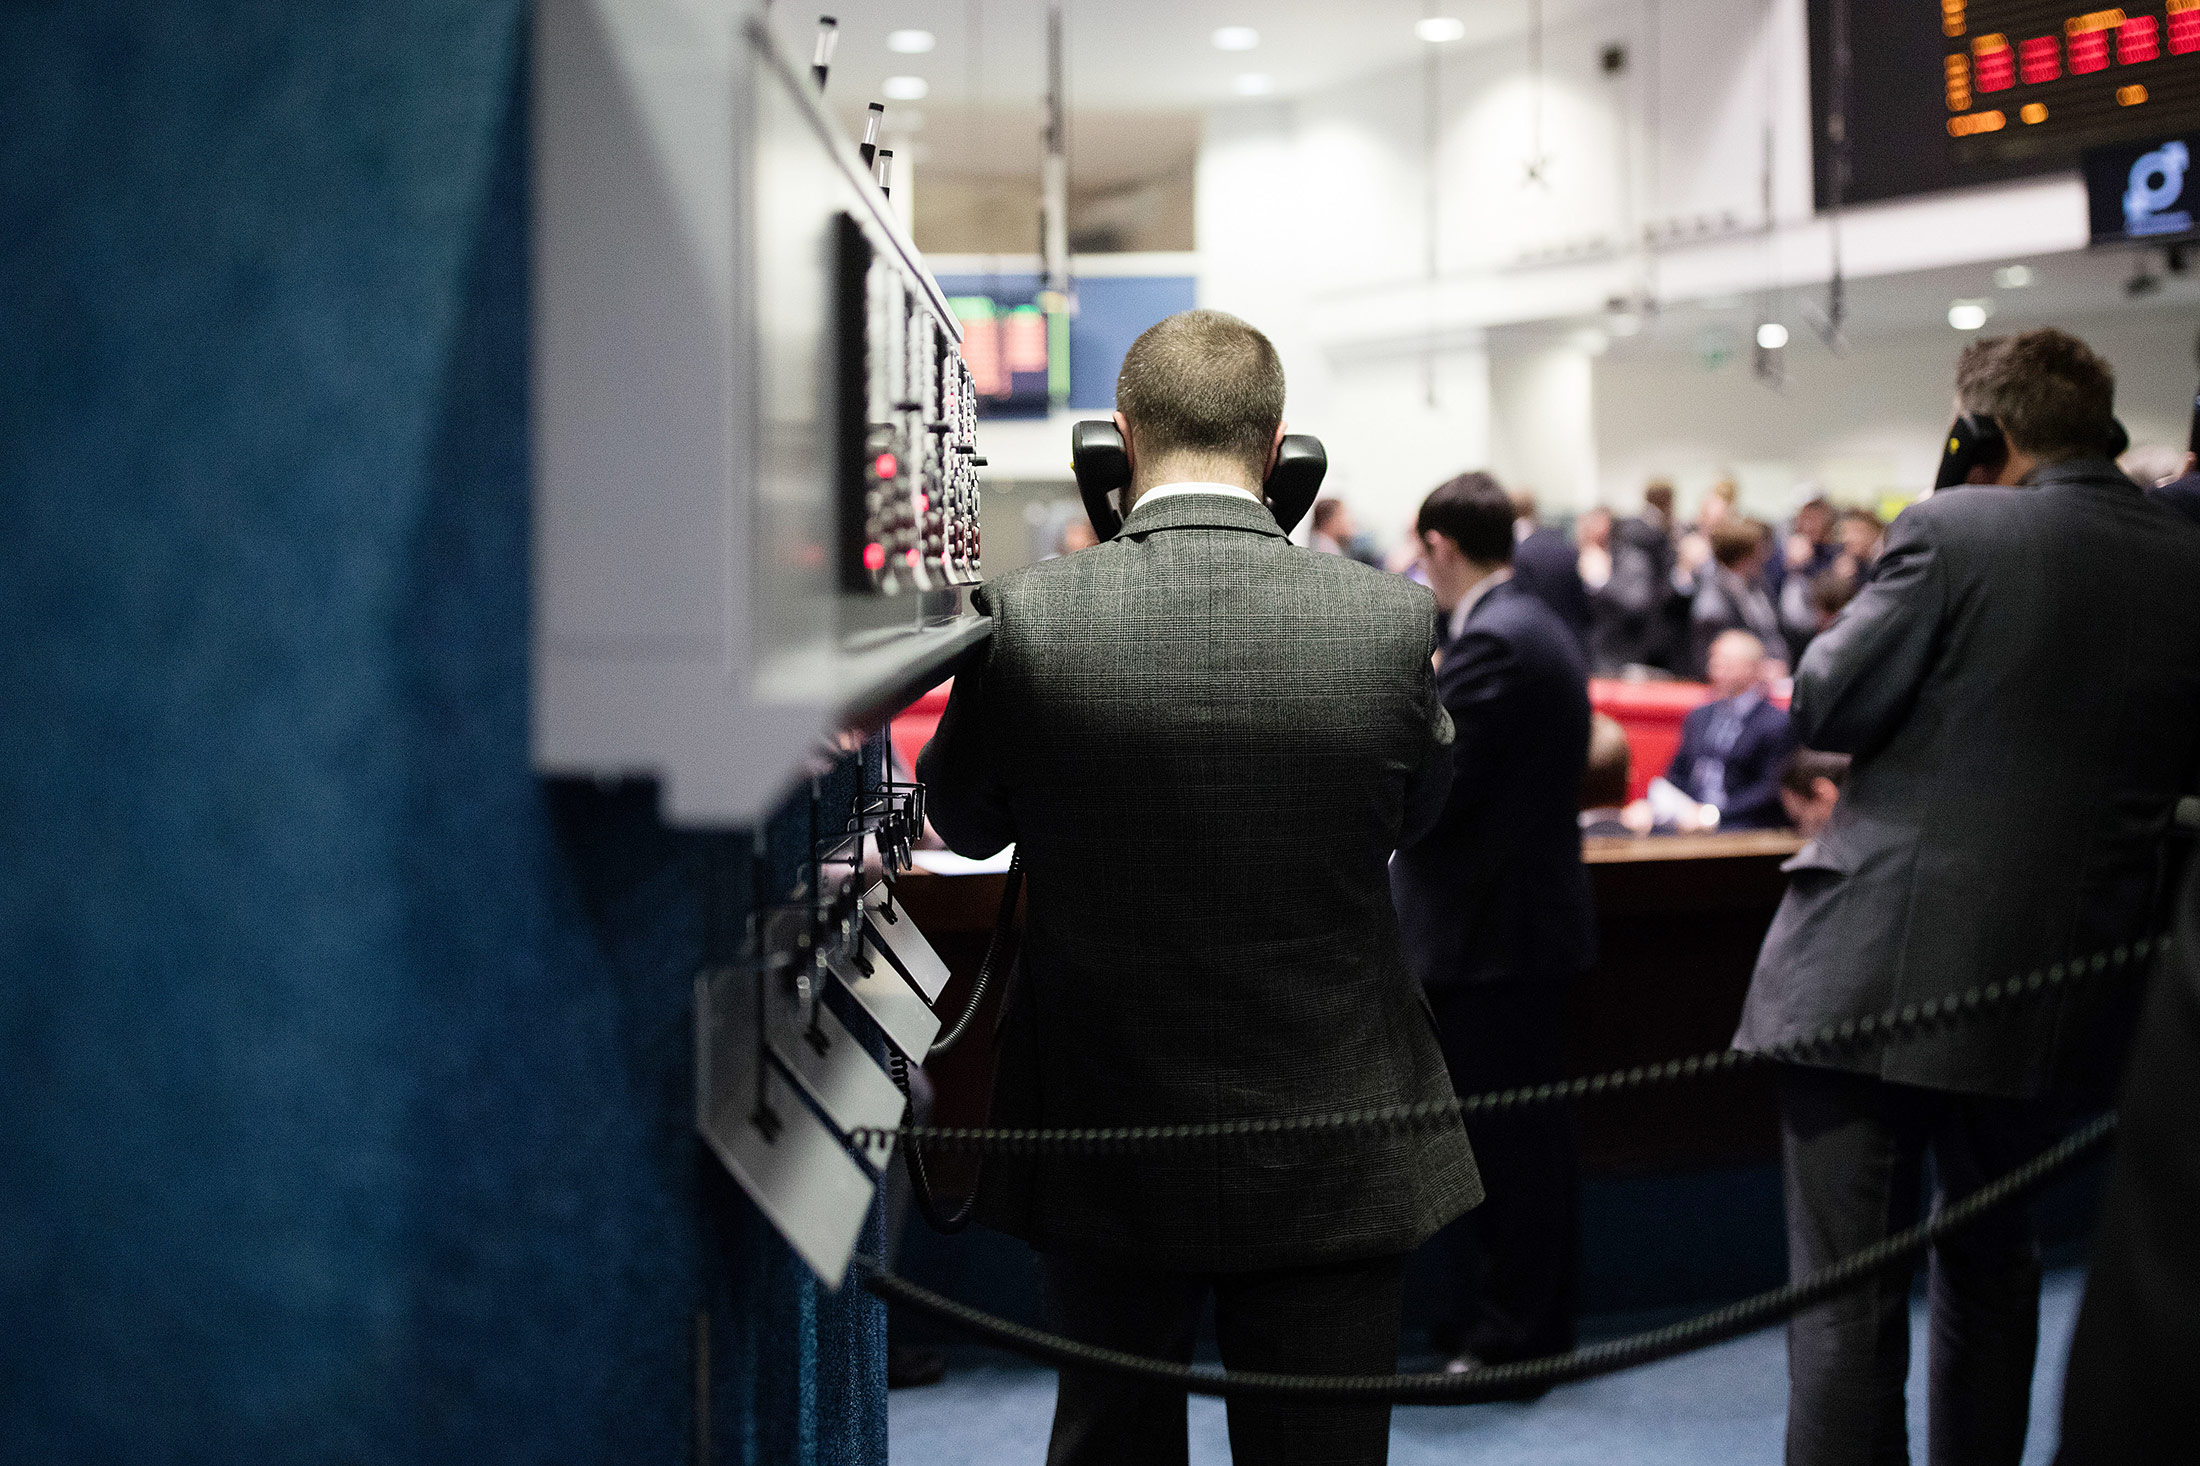 A trader uses telephones as he works from the trading floor of the open outcry pit at the London Metal Exchange (LME) in London.
